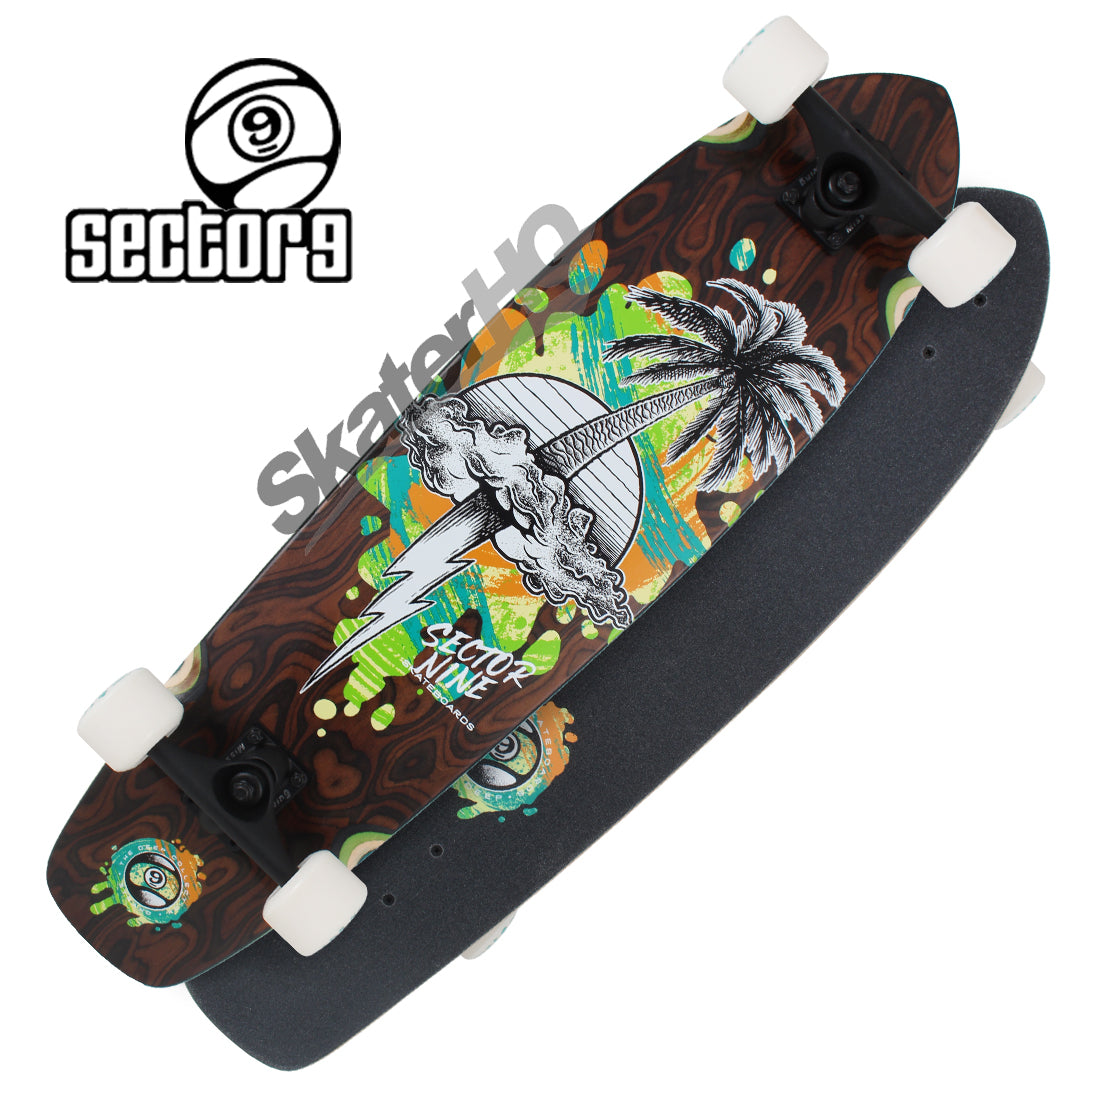 Sector 9 Strand Squall 34 Complete - Brown/Green Skateboard Completes Longboards